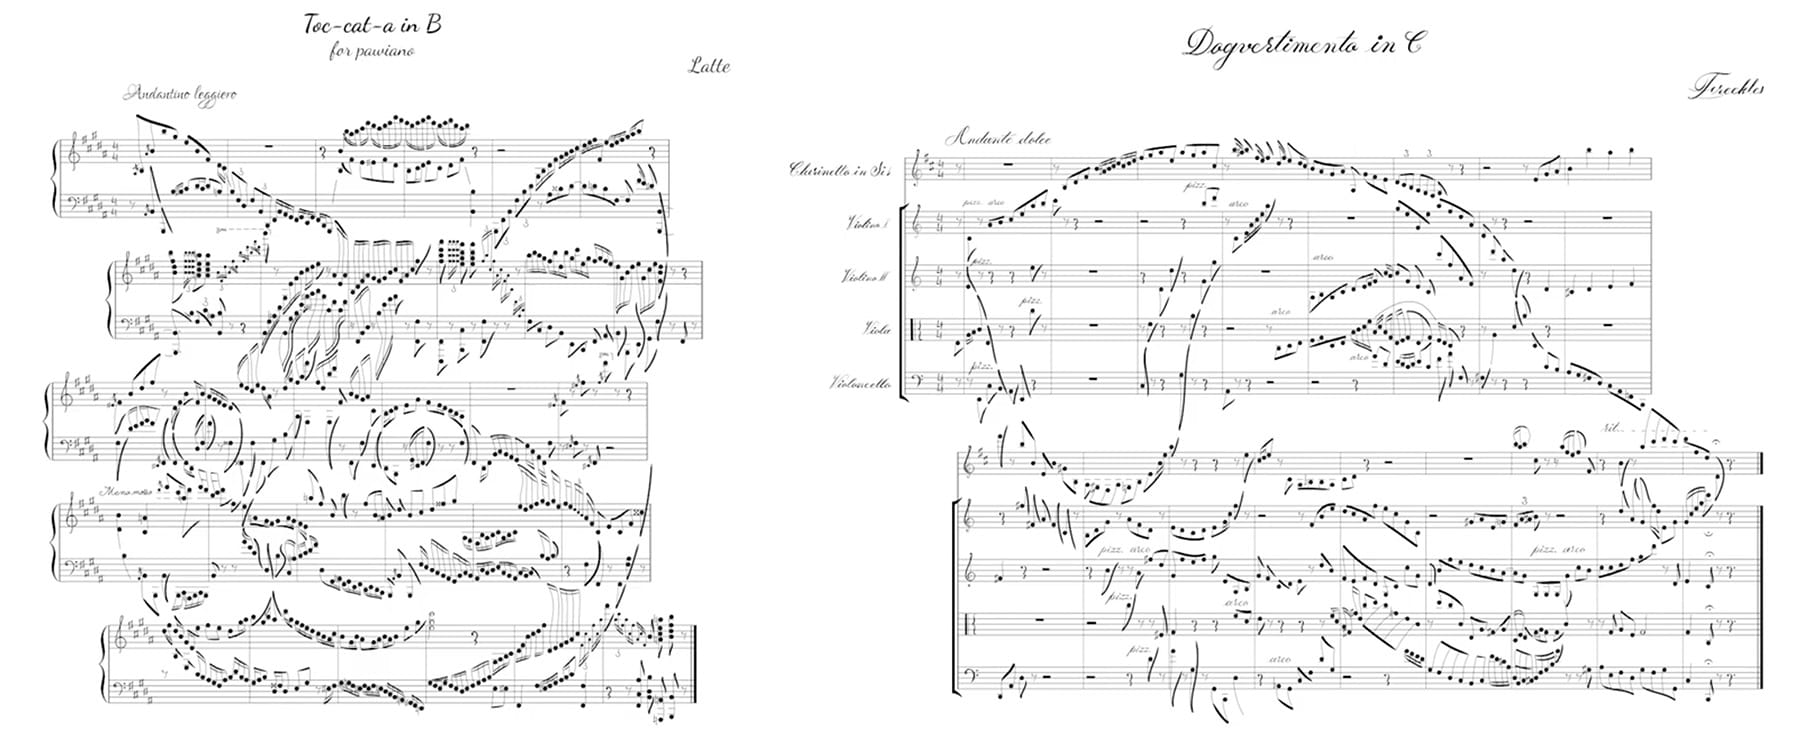 a side-by-side image of two sheet music illustrations showing a cat on the left and a dog on the right